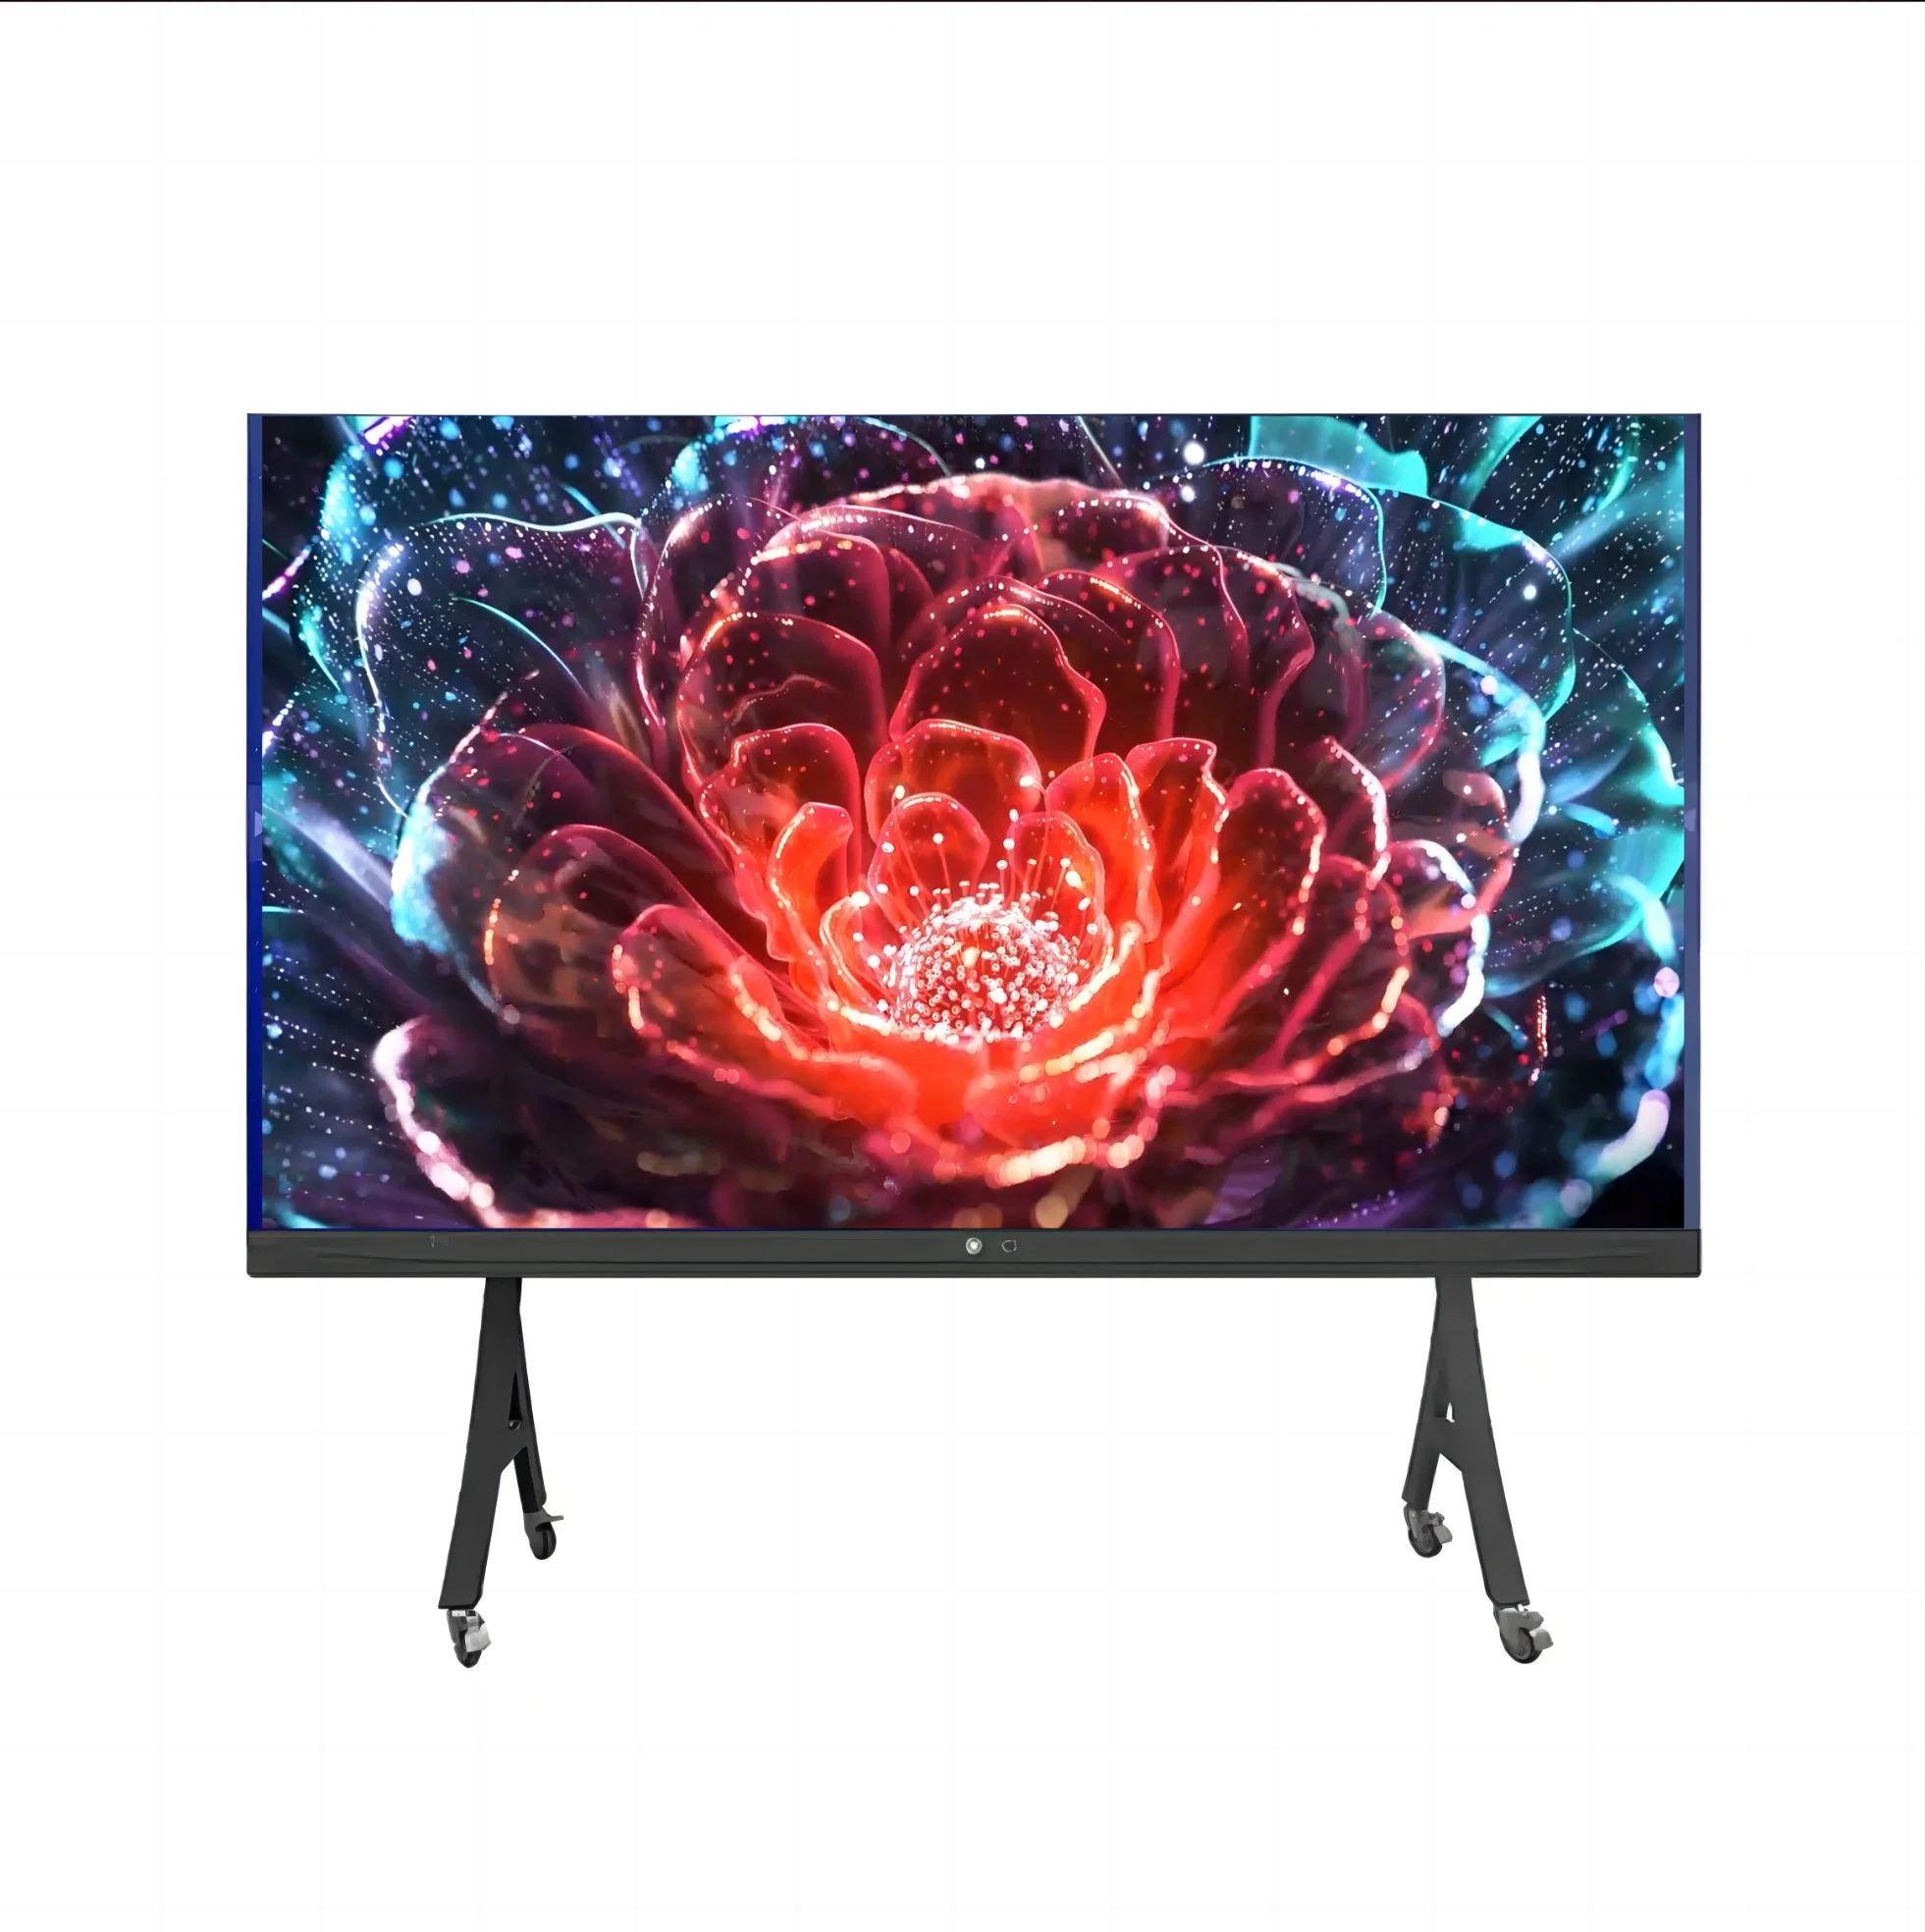 Indoor P2 High Resolution LED Screen Display Big LED TV for Conference